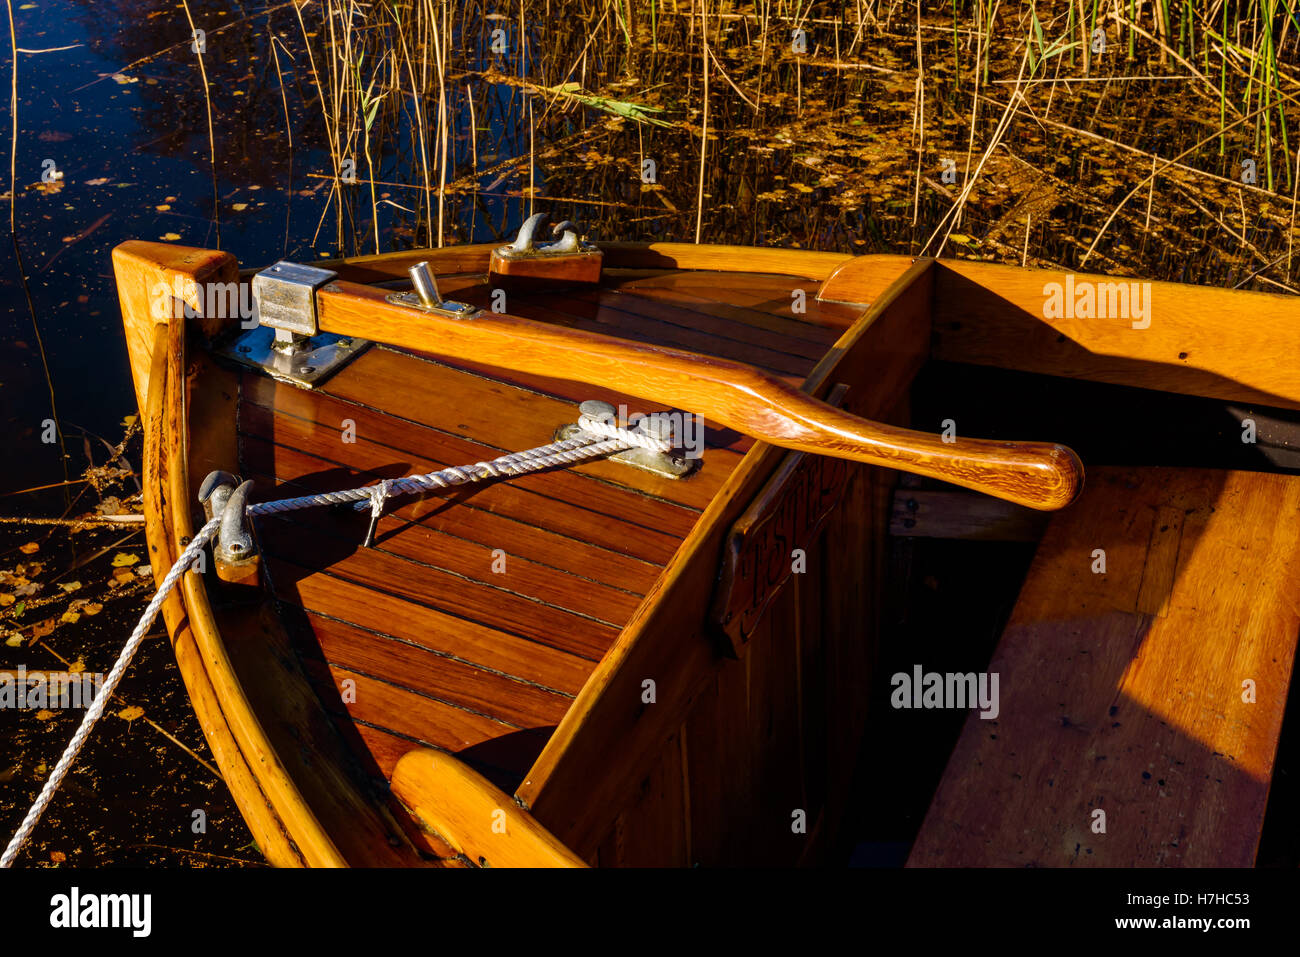 Vieryd, Sweden - October 29, 2016: Documentary of coastal lifestyle. Detail of rudder and aft part of handmade motorboat. Stock Photo